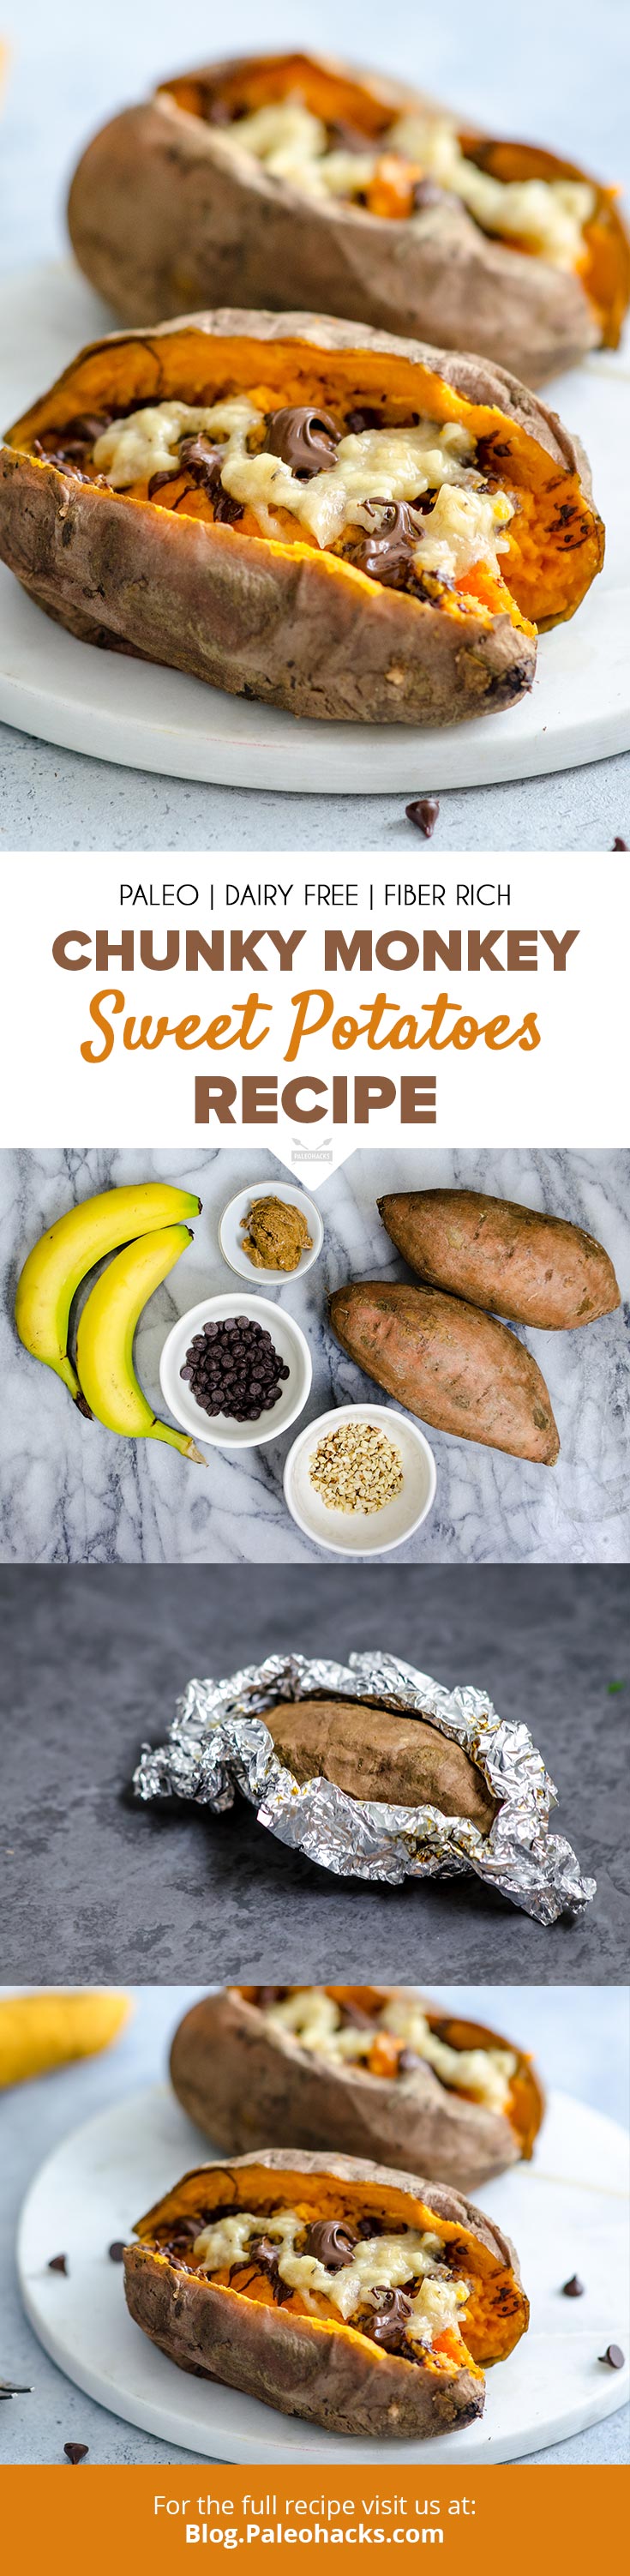 Satisfy your sweet tooth with Chunky Monkey Sweet Potatoes loaded with sliced bananas and dark chocolate.